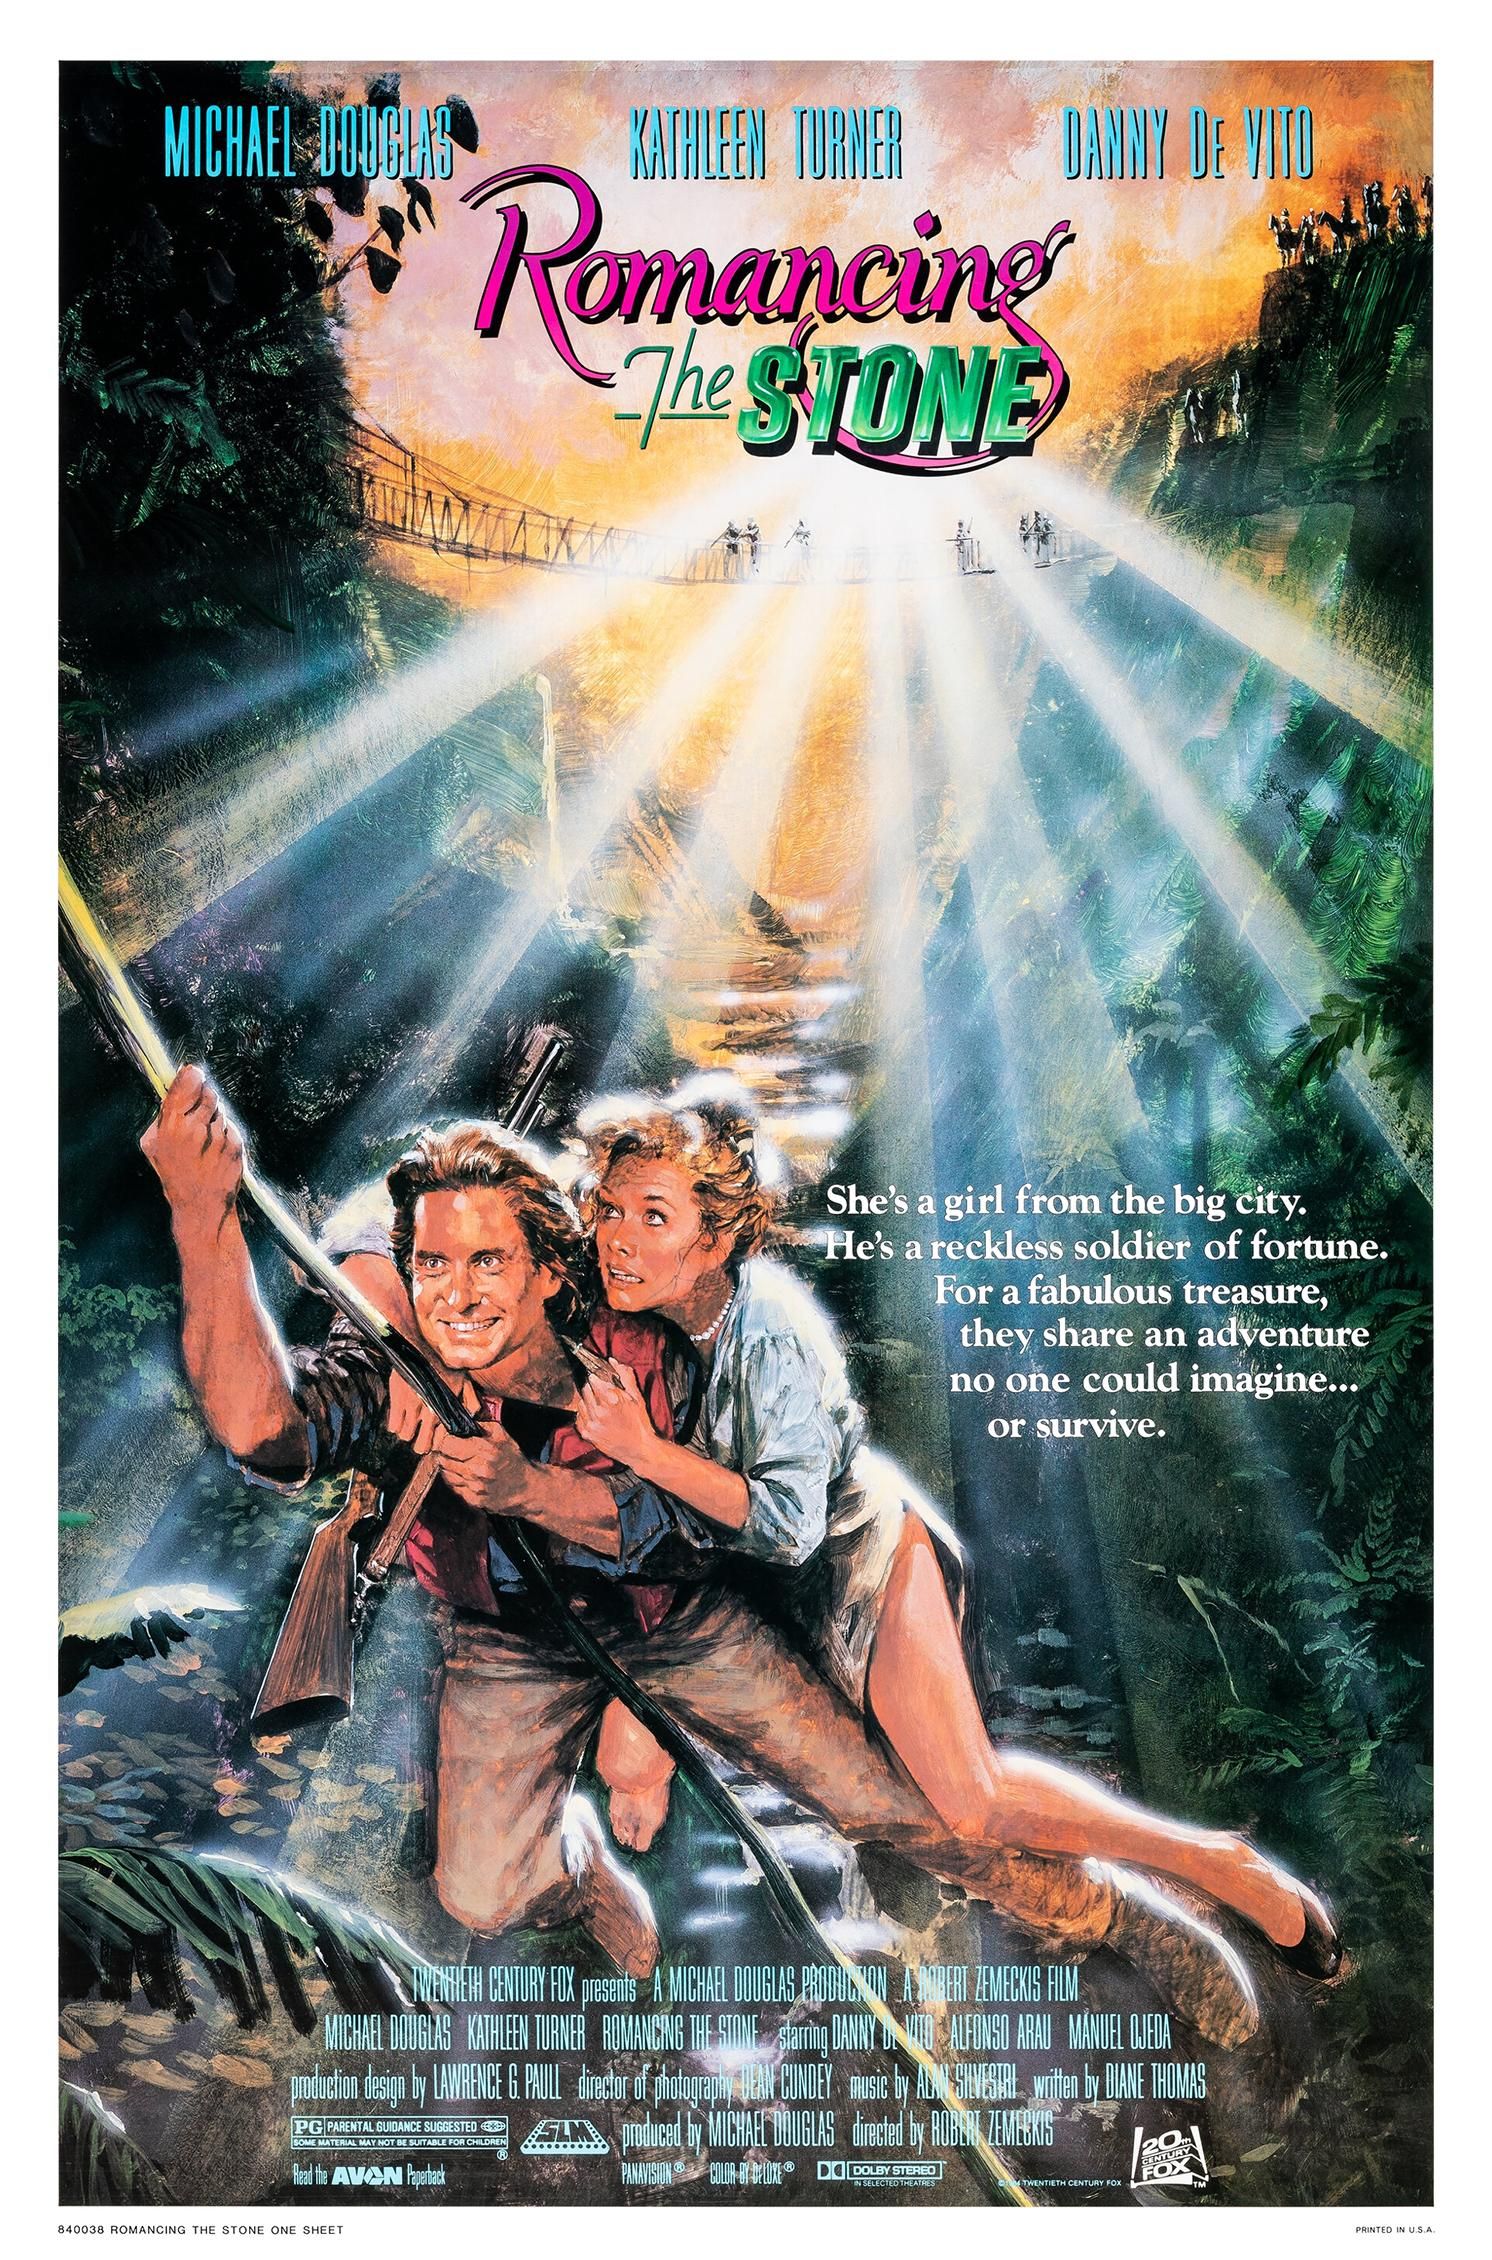 Michael Douglas and Kathleen Turner in Romancing the Stone 1984 Film Poster